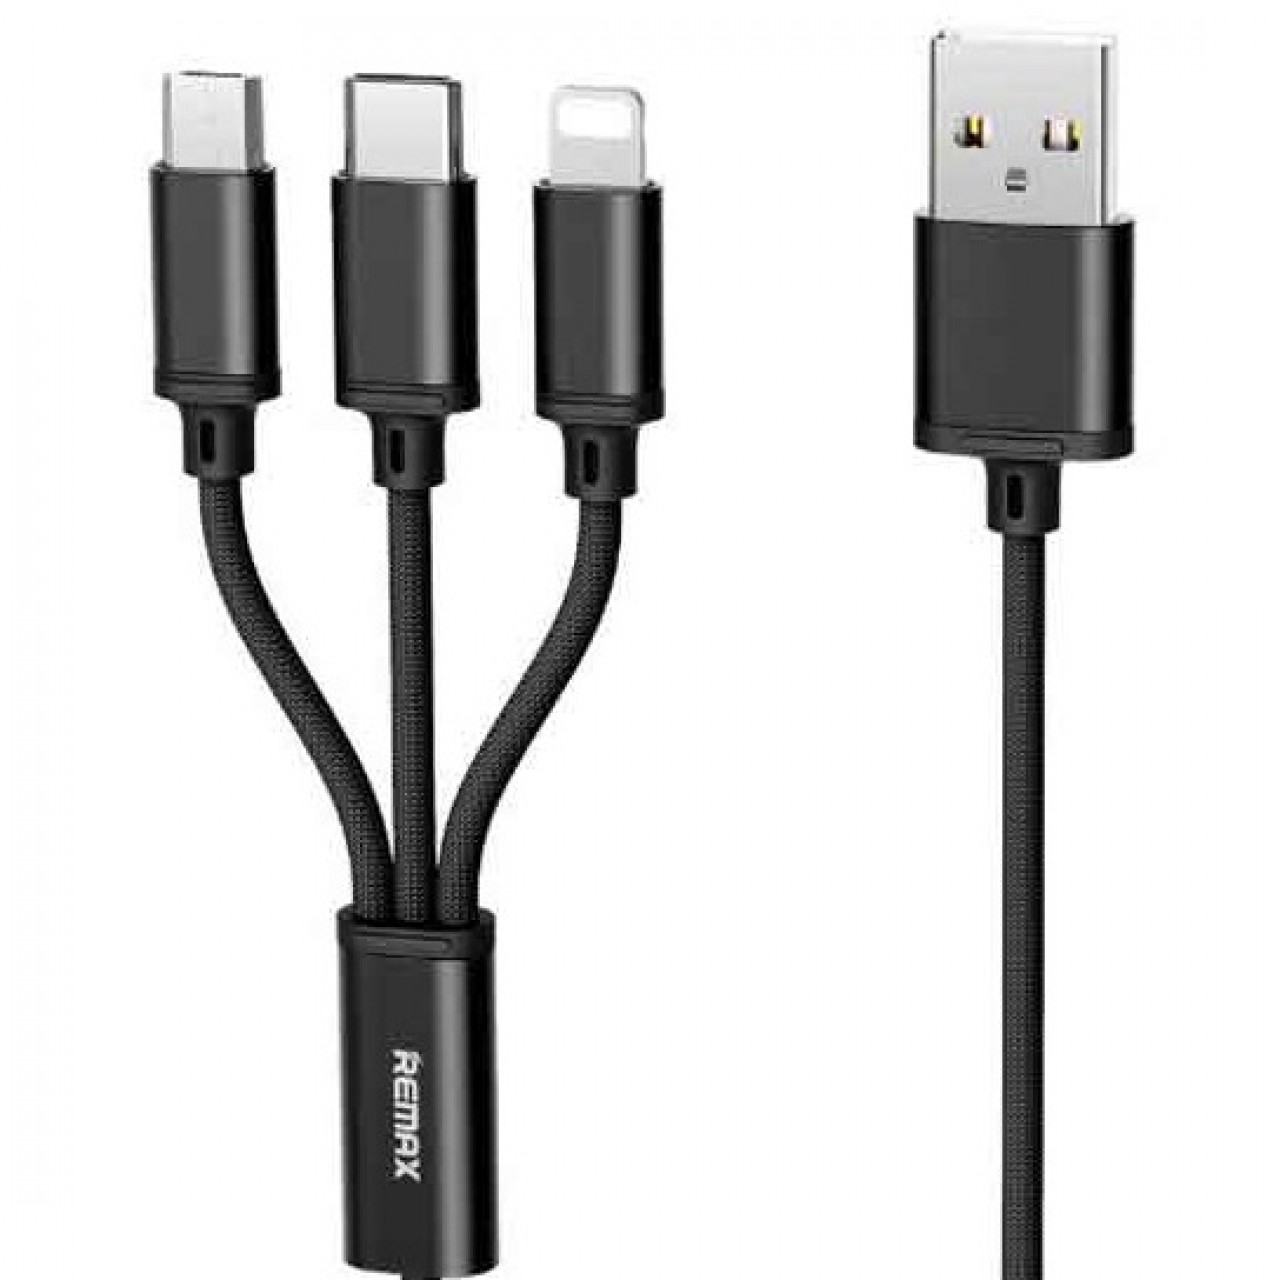 Remax 3in1 Cable RC-131th Gition Series For Micro USB,Type-C And Lightning - Black